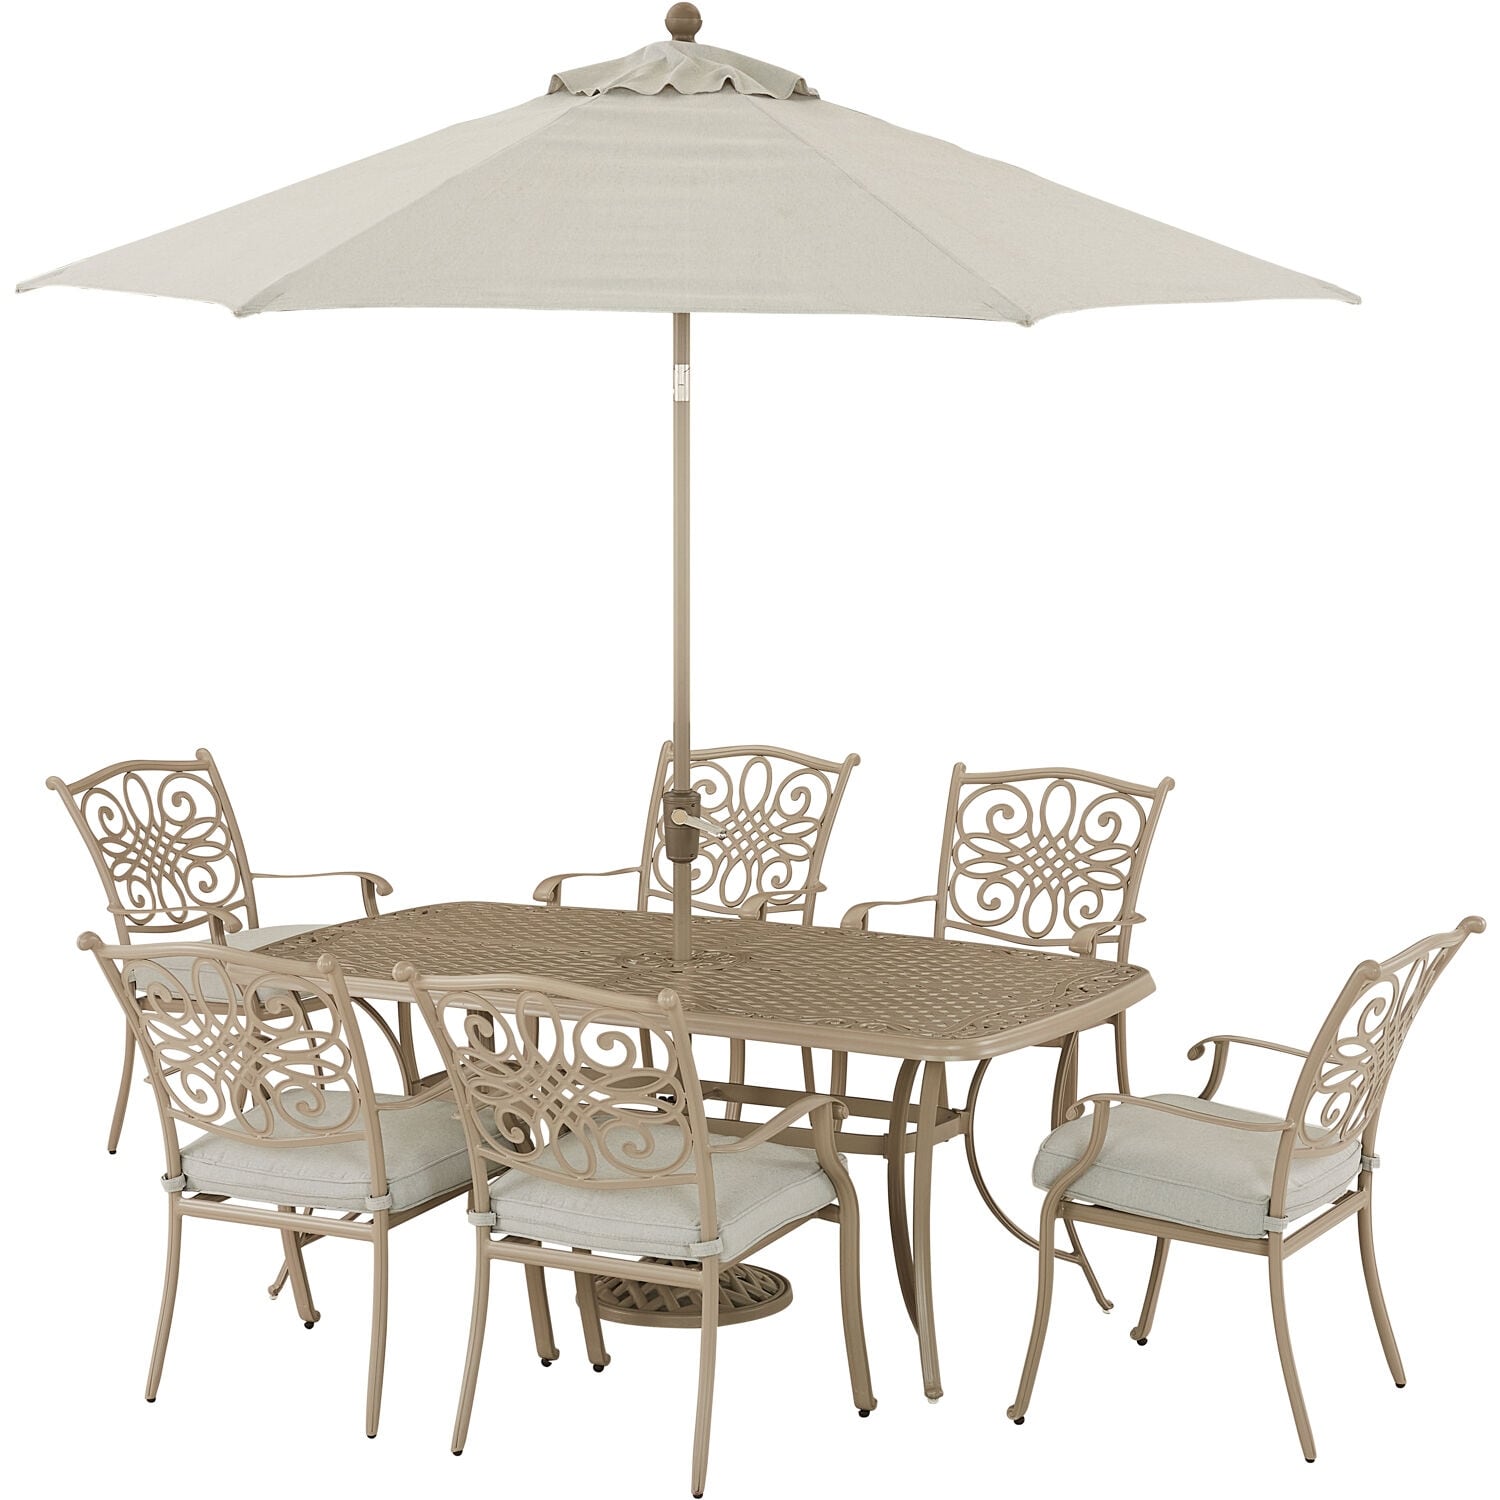 Hanover Traditions 7-piece Dining Set With 6 Stationary Chairs  38-in. X 72-in. Table  9-ft. Umbrella  And Stand  Sand Finish